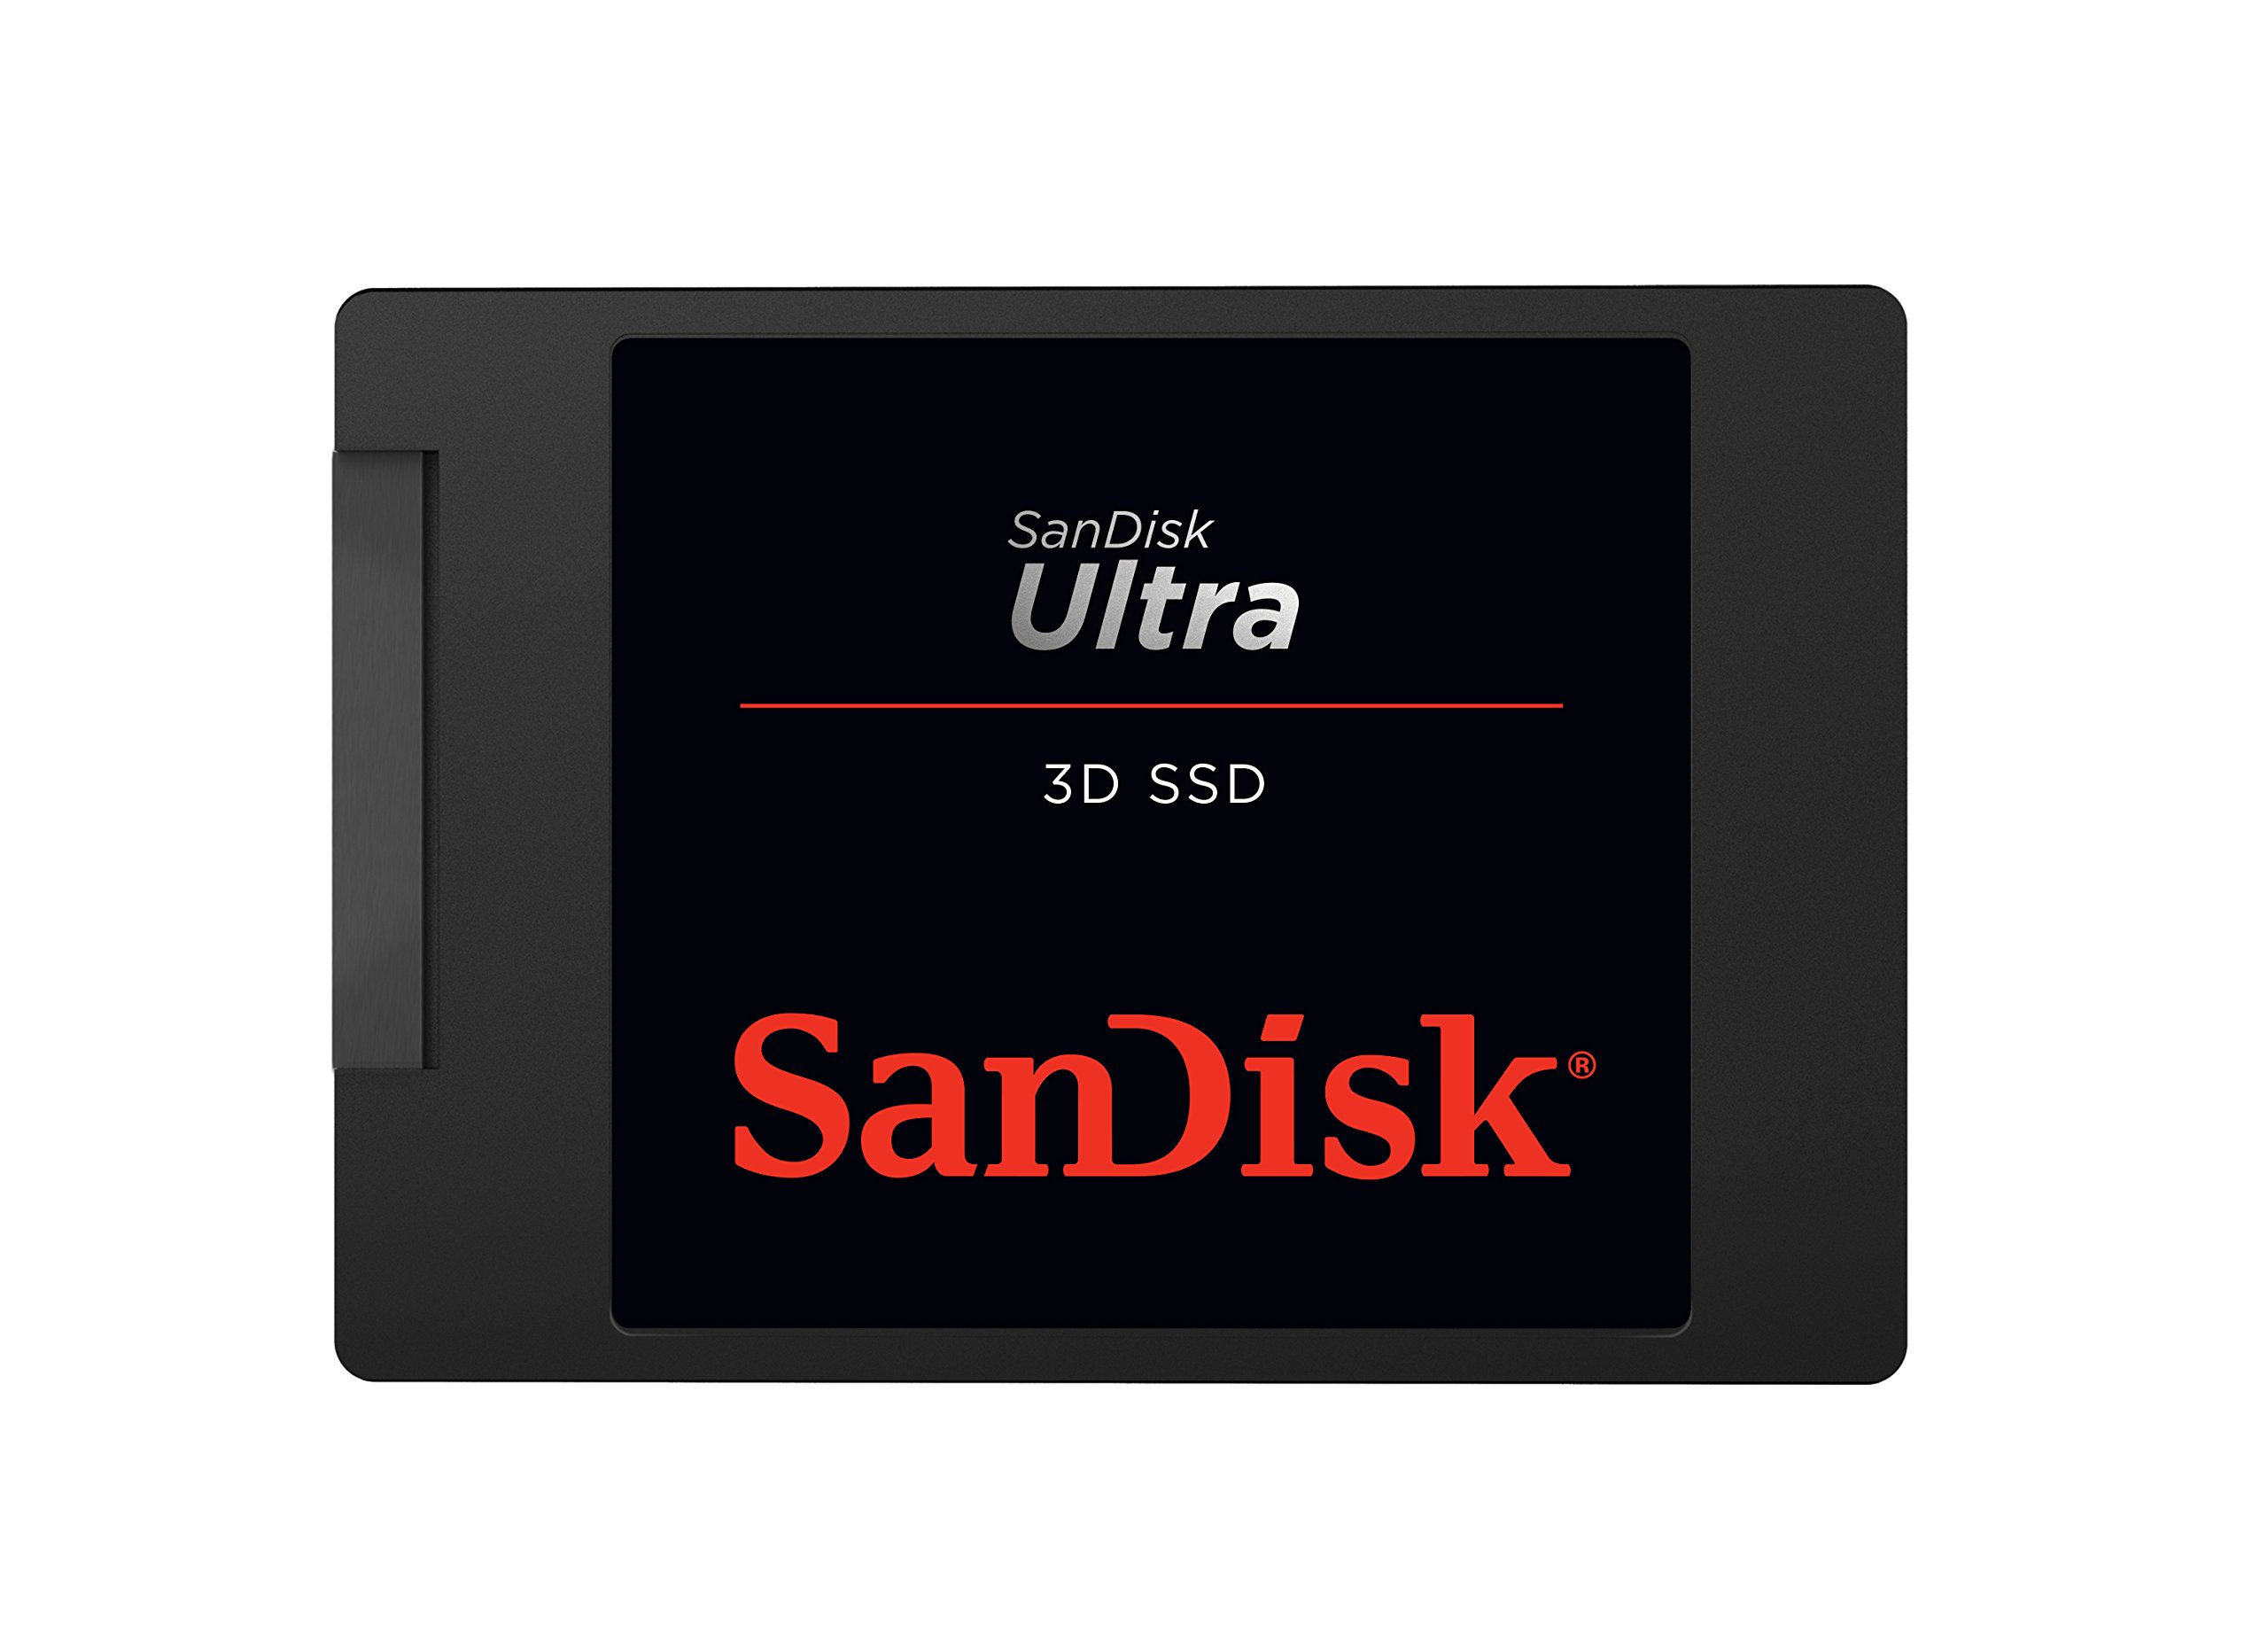 SanDisk サンディスク 内蔵 SSD Ultra 3D 500GB 2.5インチ SATA 読み出し最大 560MBs 書込み最大 510MBs P